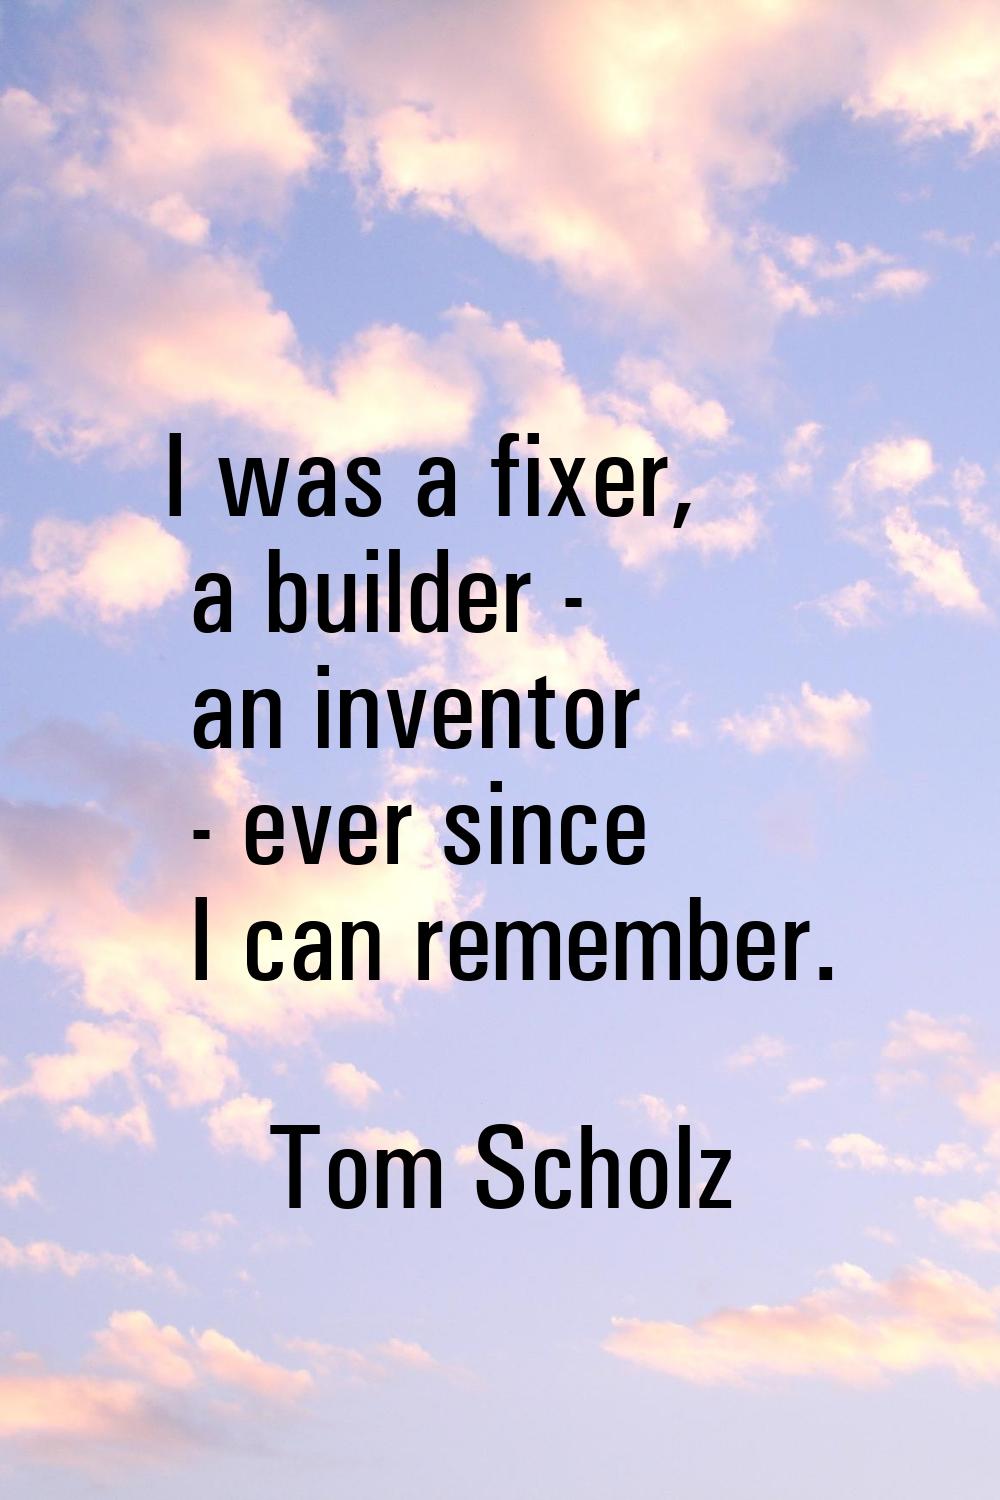 I was a fixer, a builder - an inventor - ever since I can remember.